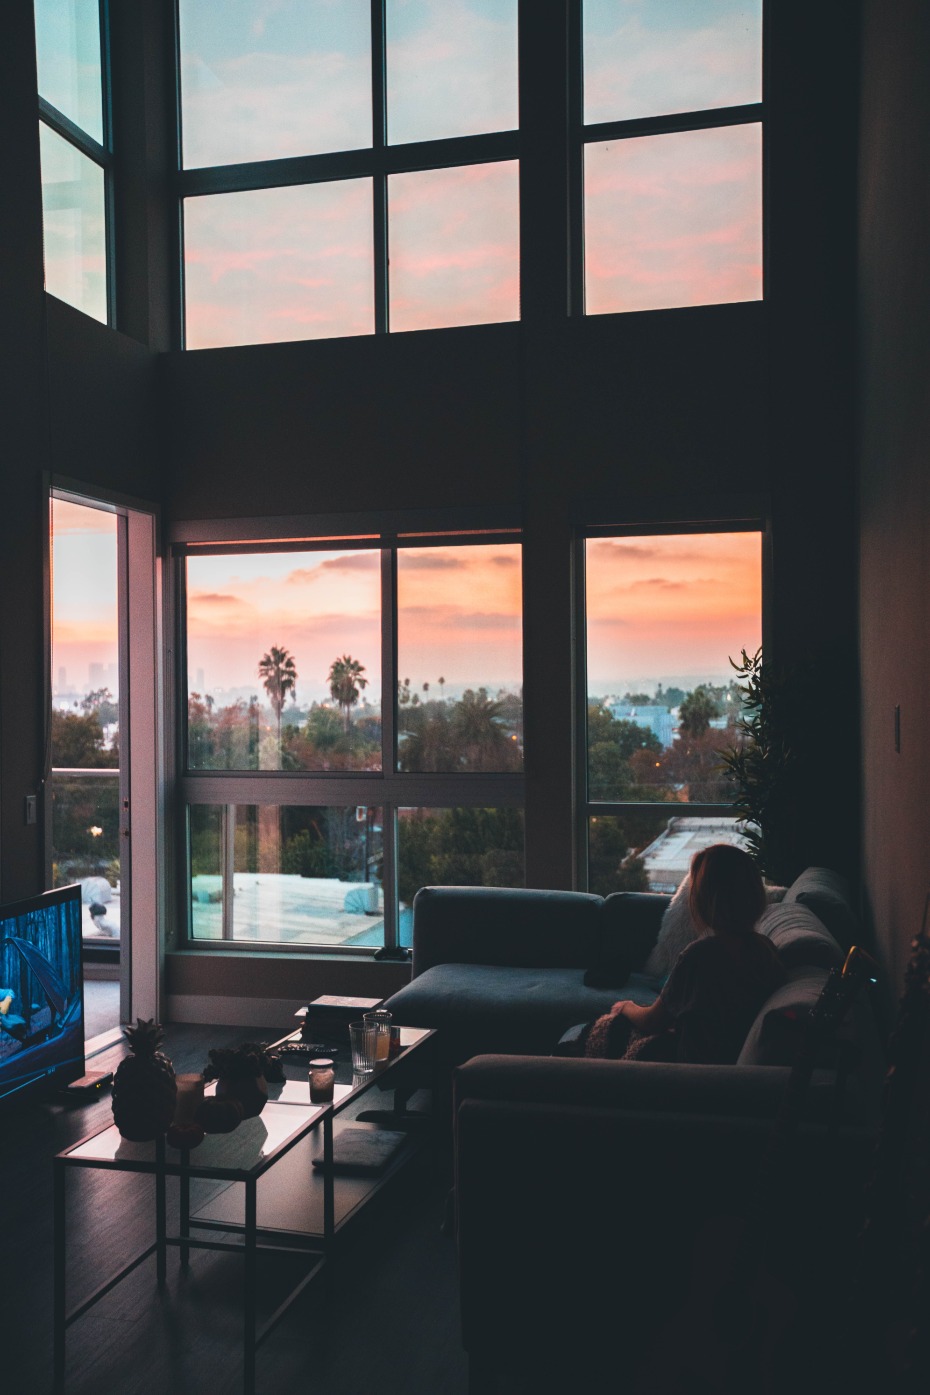 Woman watching tv with sun setting outside